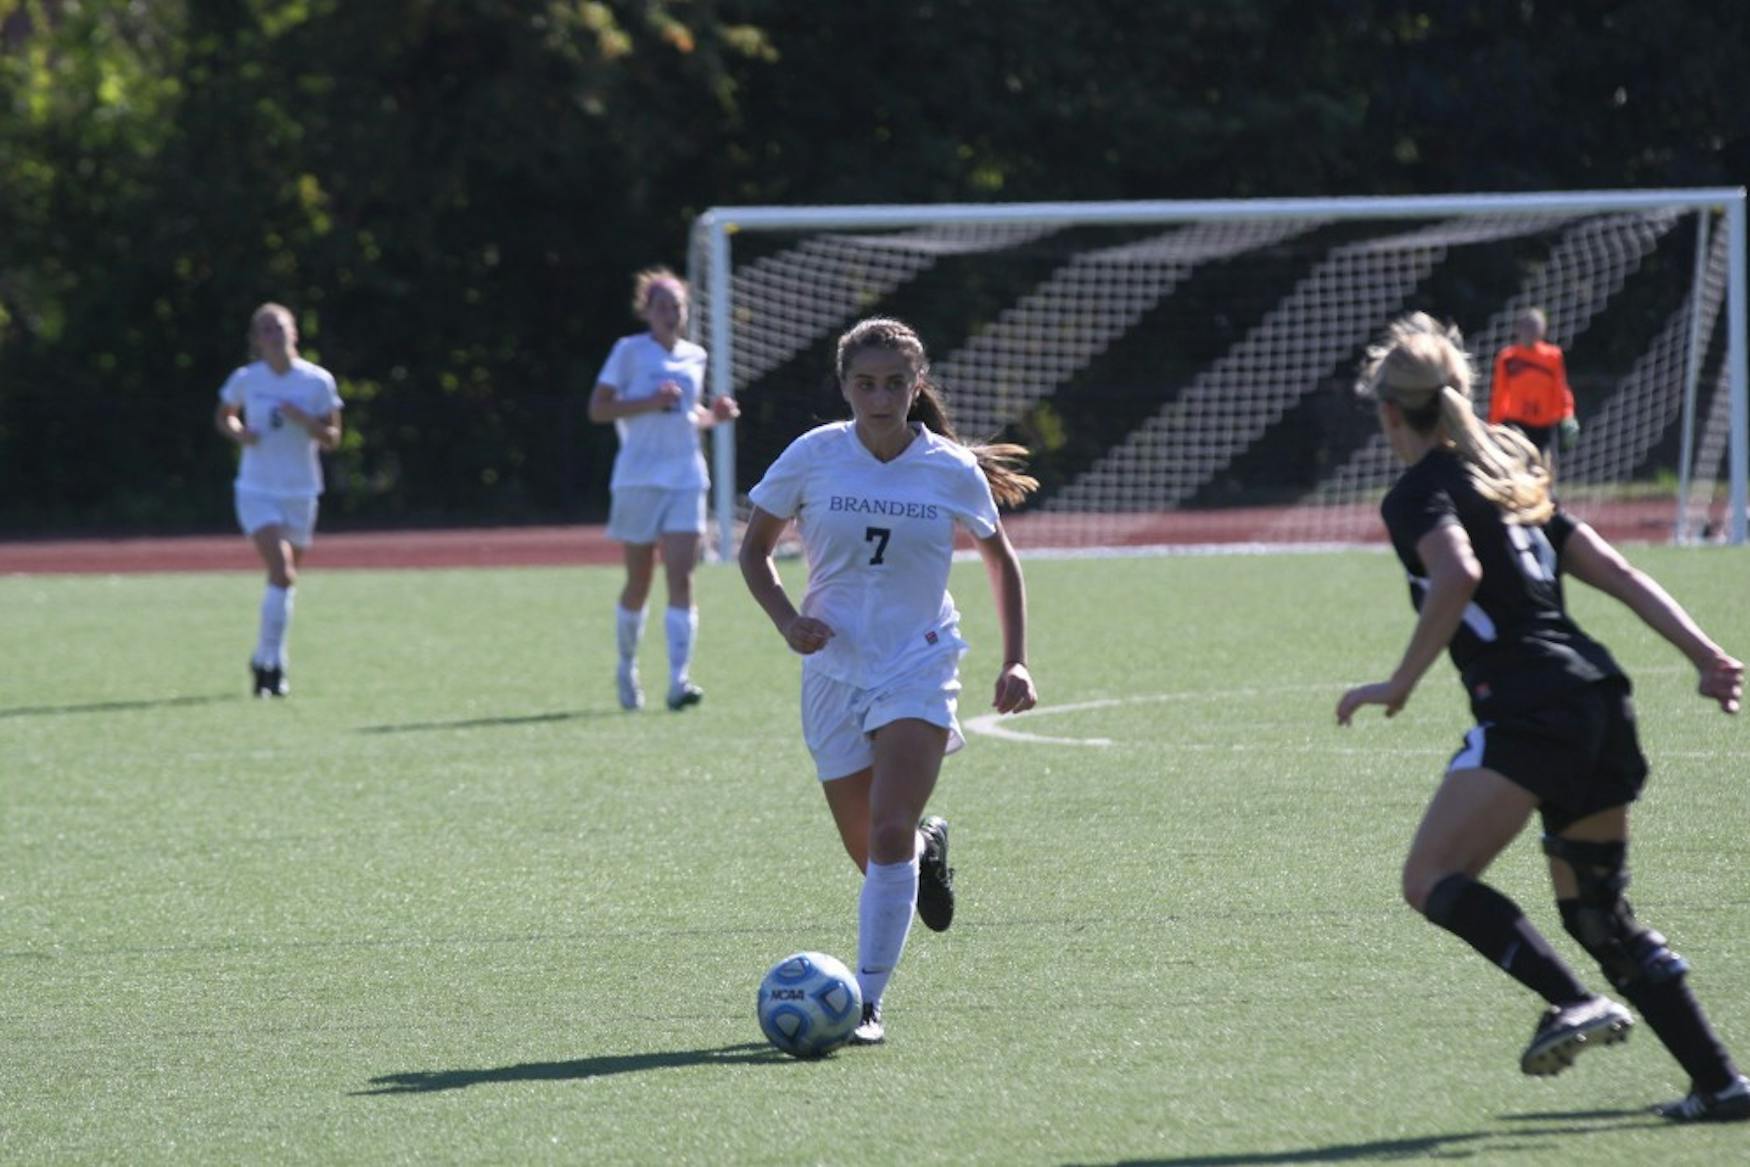 MIDFIELD MAESTRO: Forward Holly Szafran ’16 takes possesion during the squad’s 1-0 victory over Bowdoin College on Sept. 27.